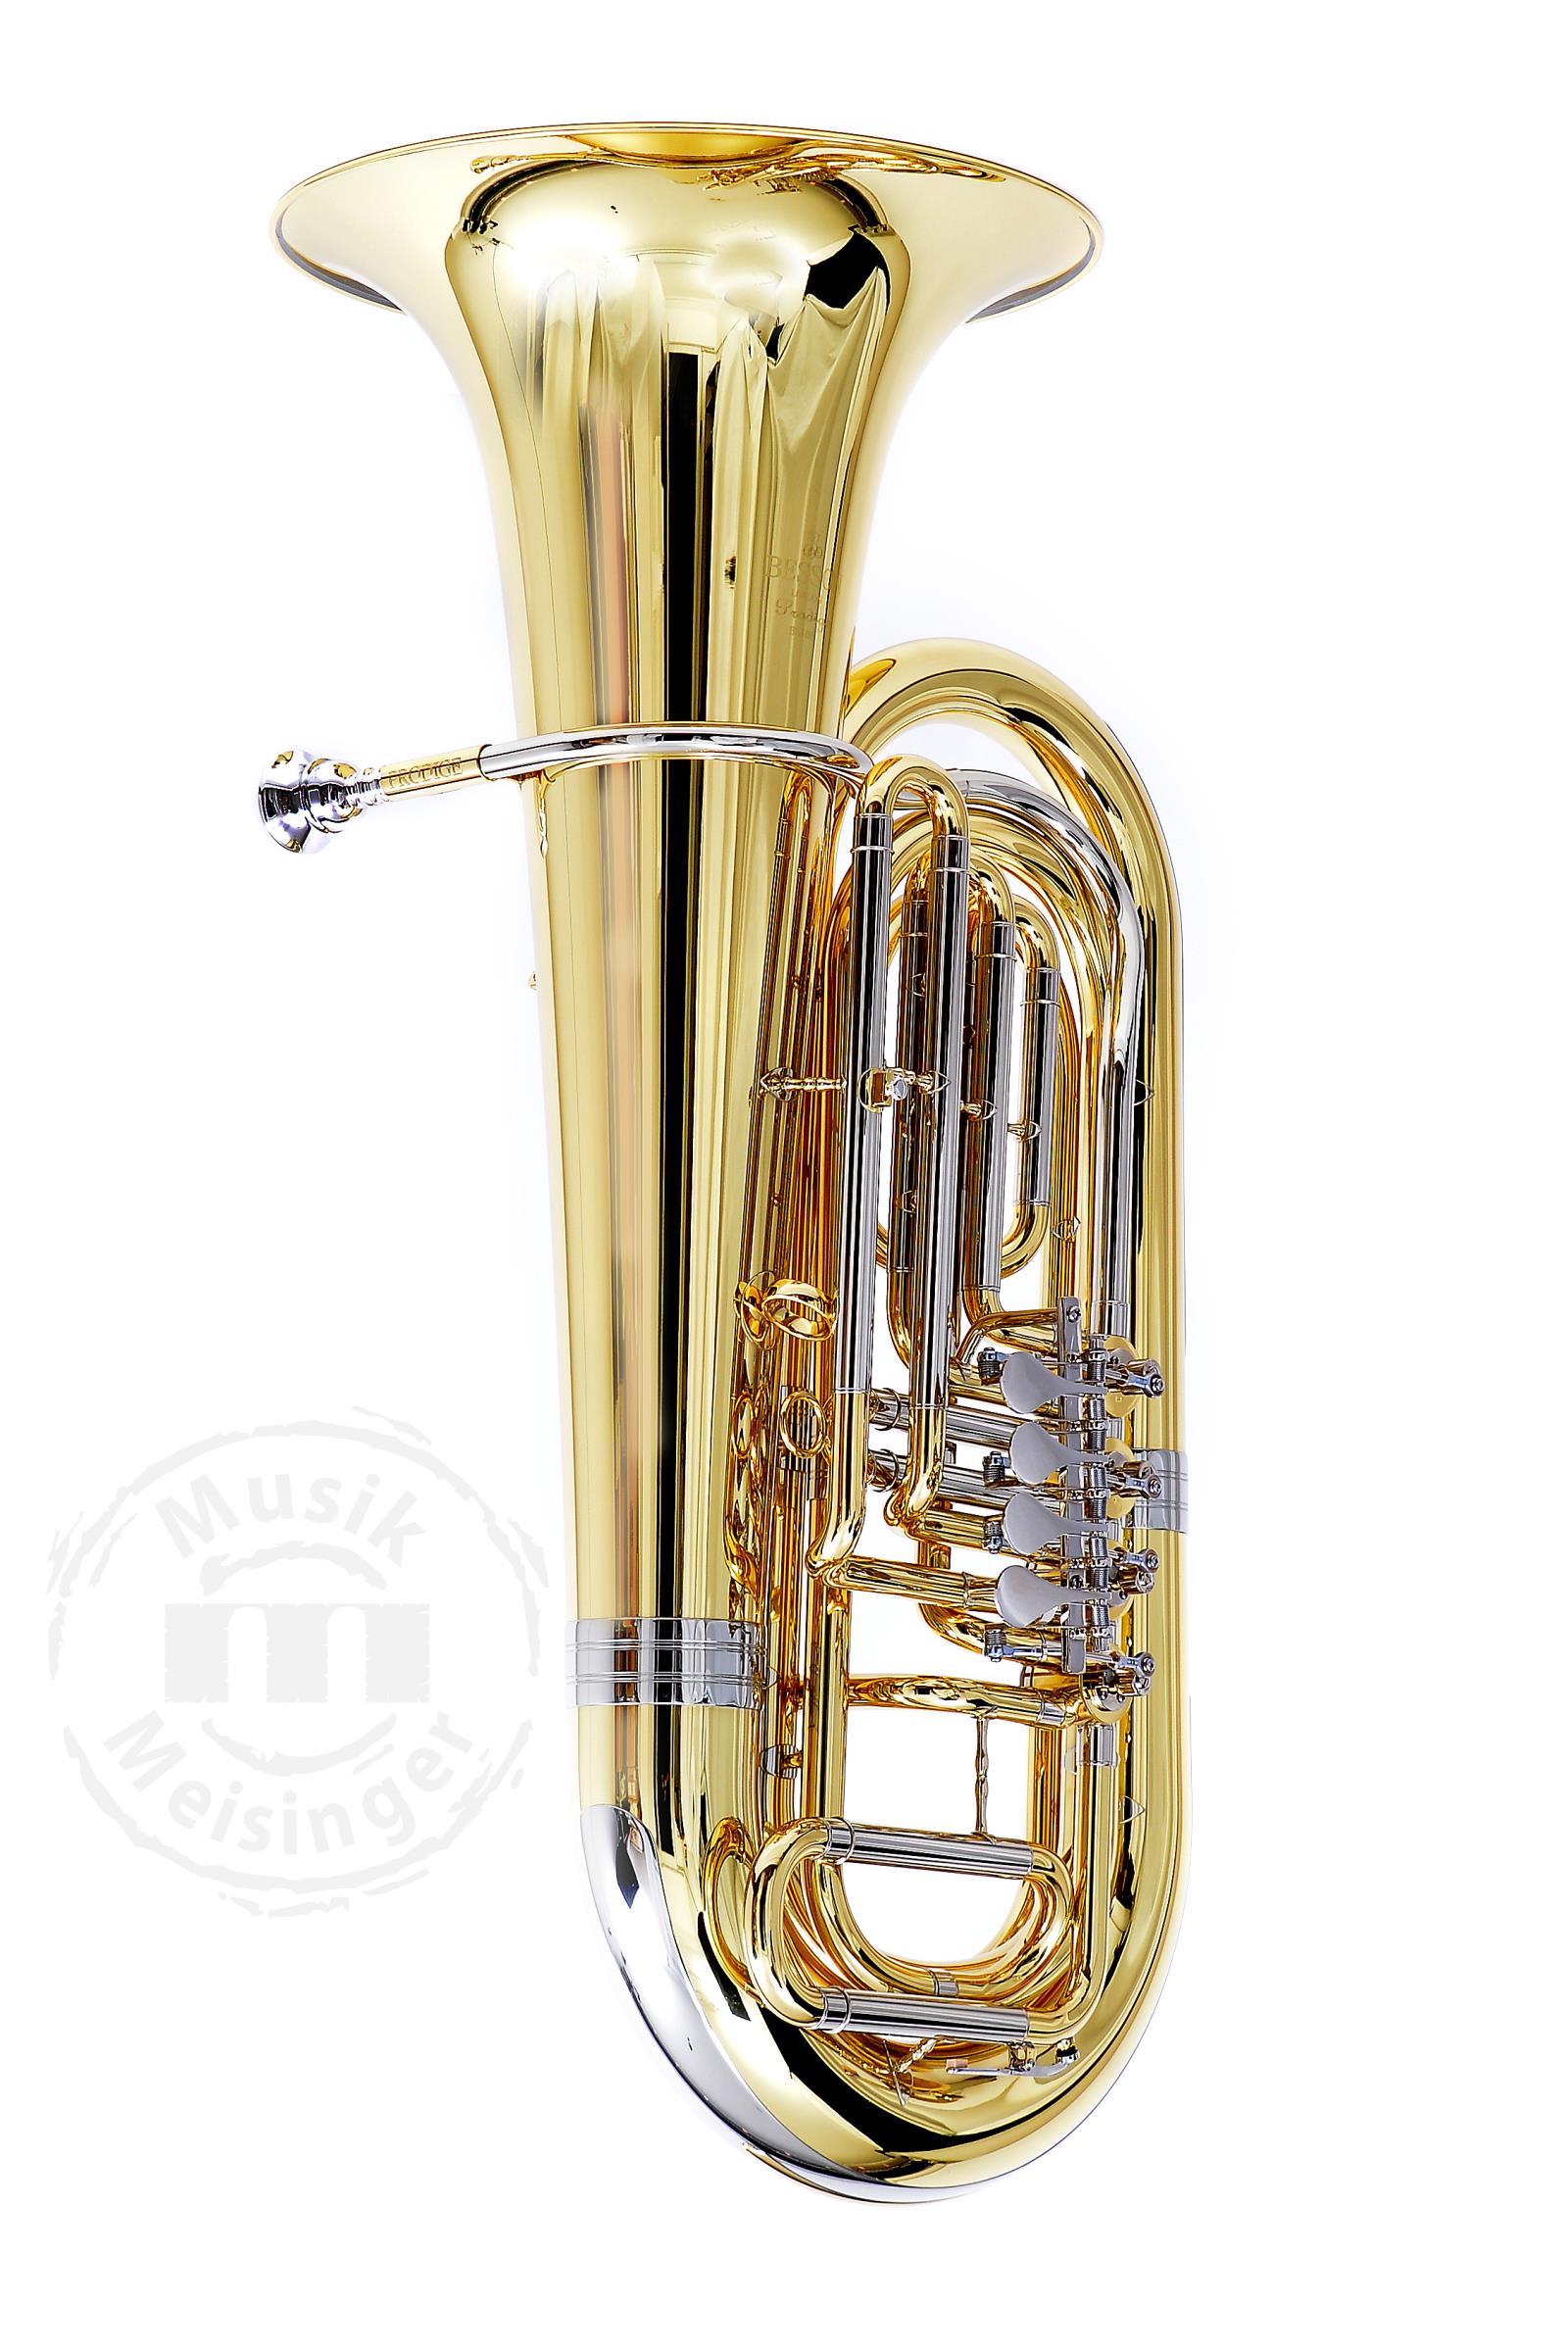 Besson BE186 B-Tuba BE186-1-0